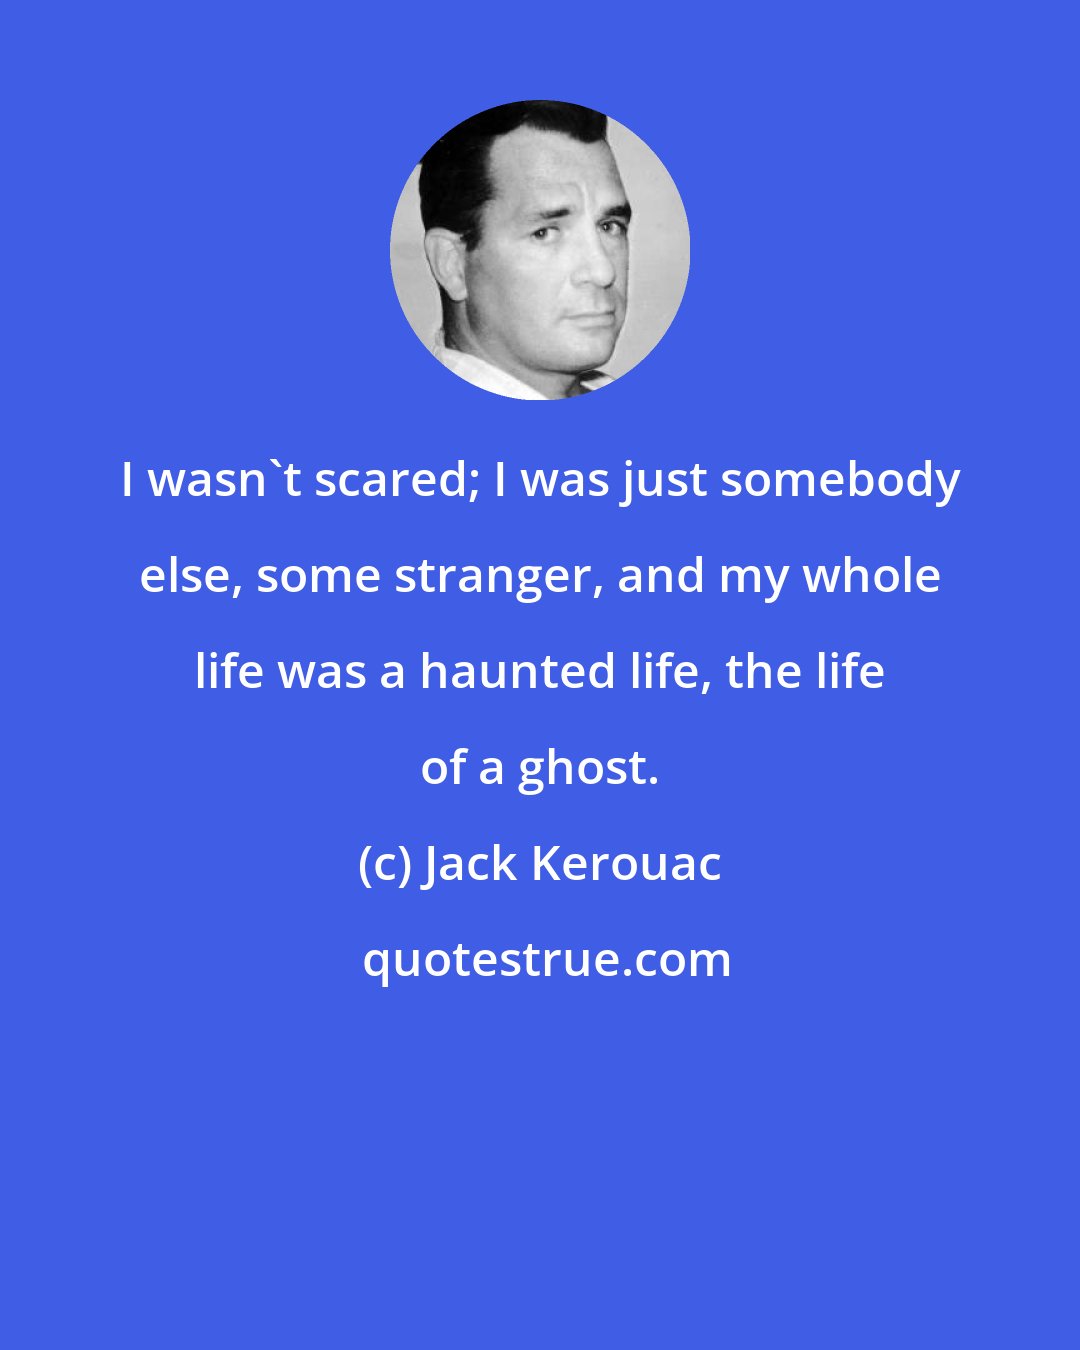 Jack Kerouac: I wasn't scared; I was just somebody else, some stranger, and my whole life was a haunted life, the life of a ghost.